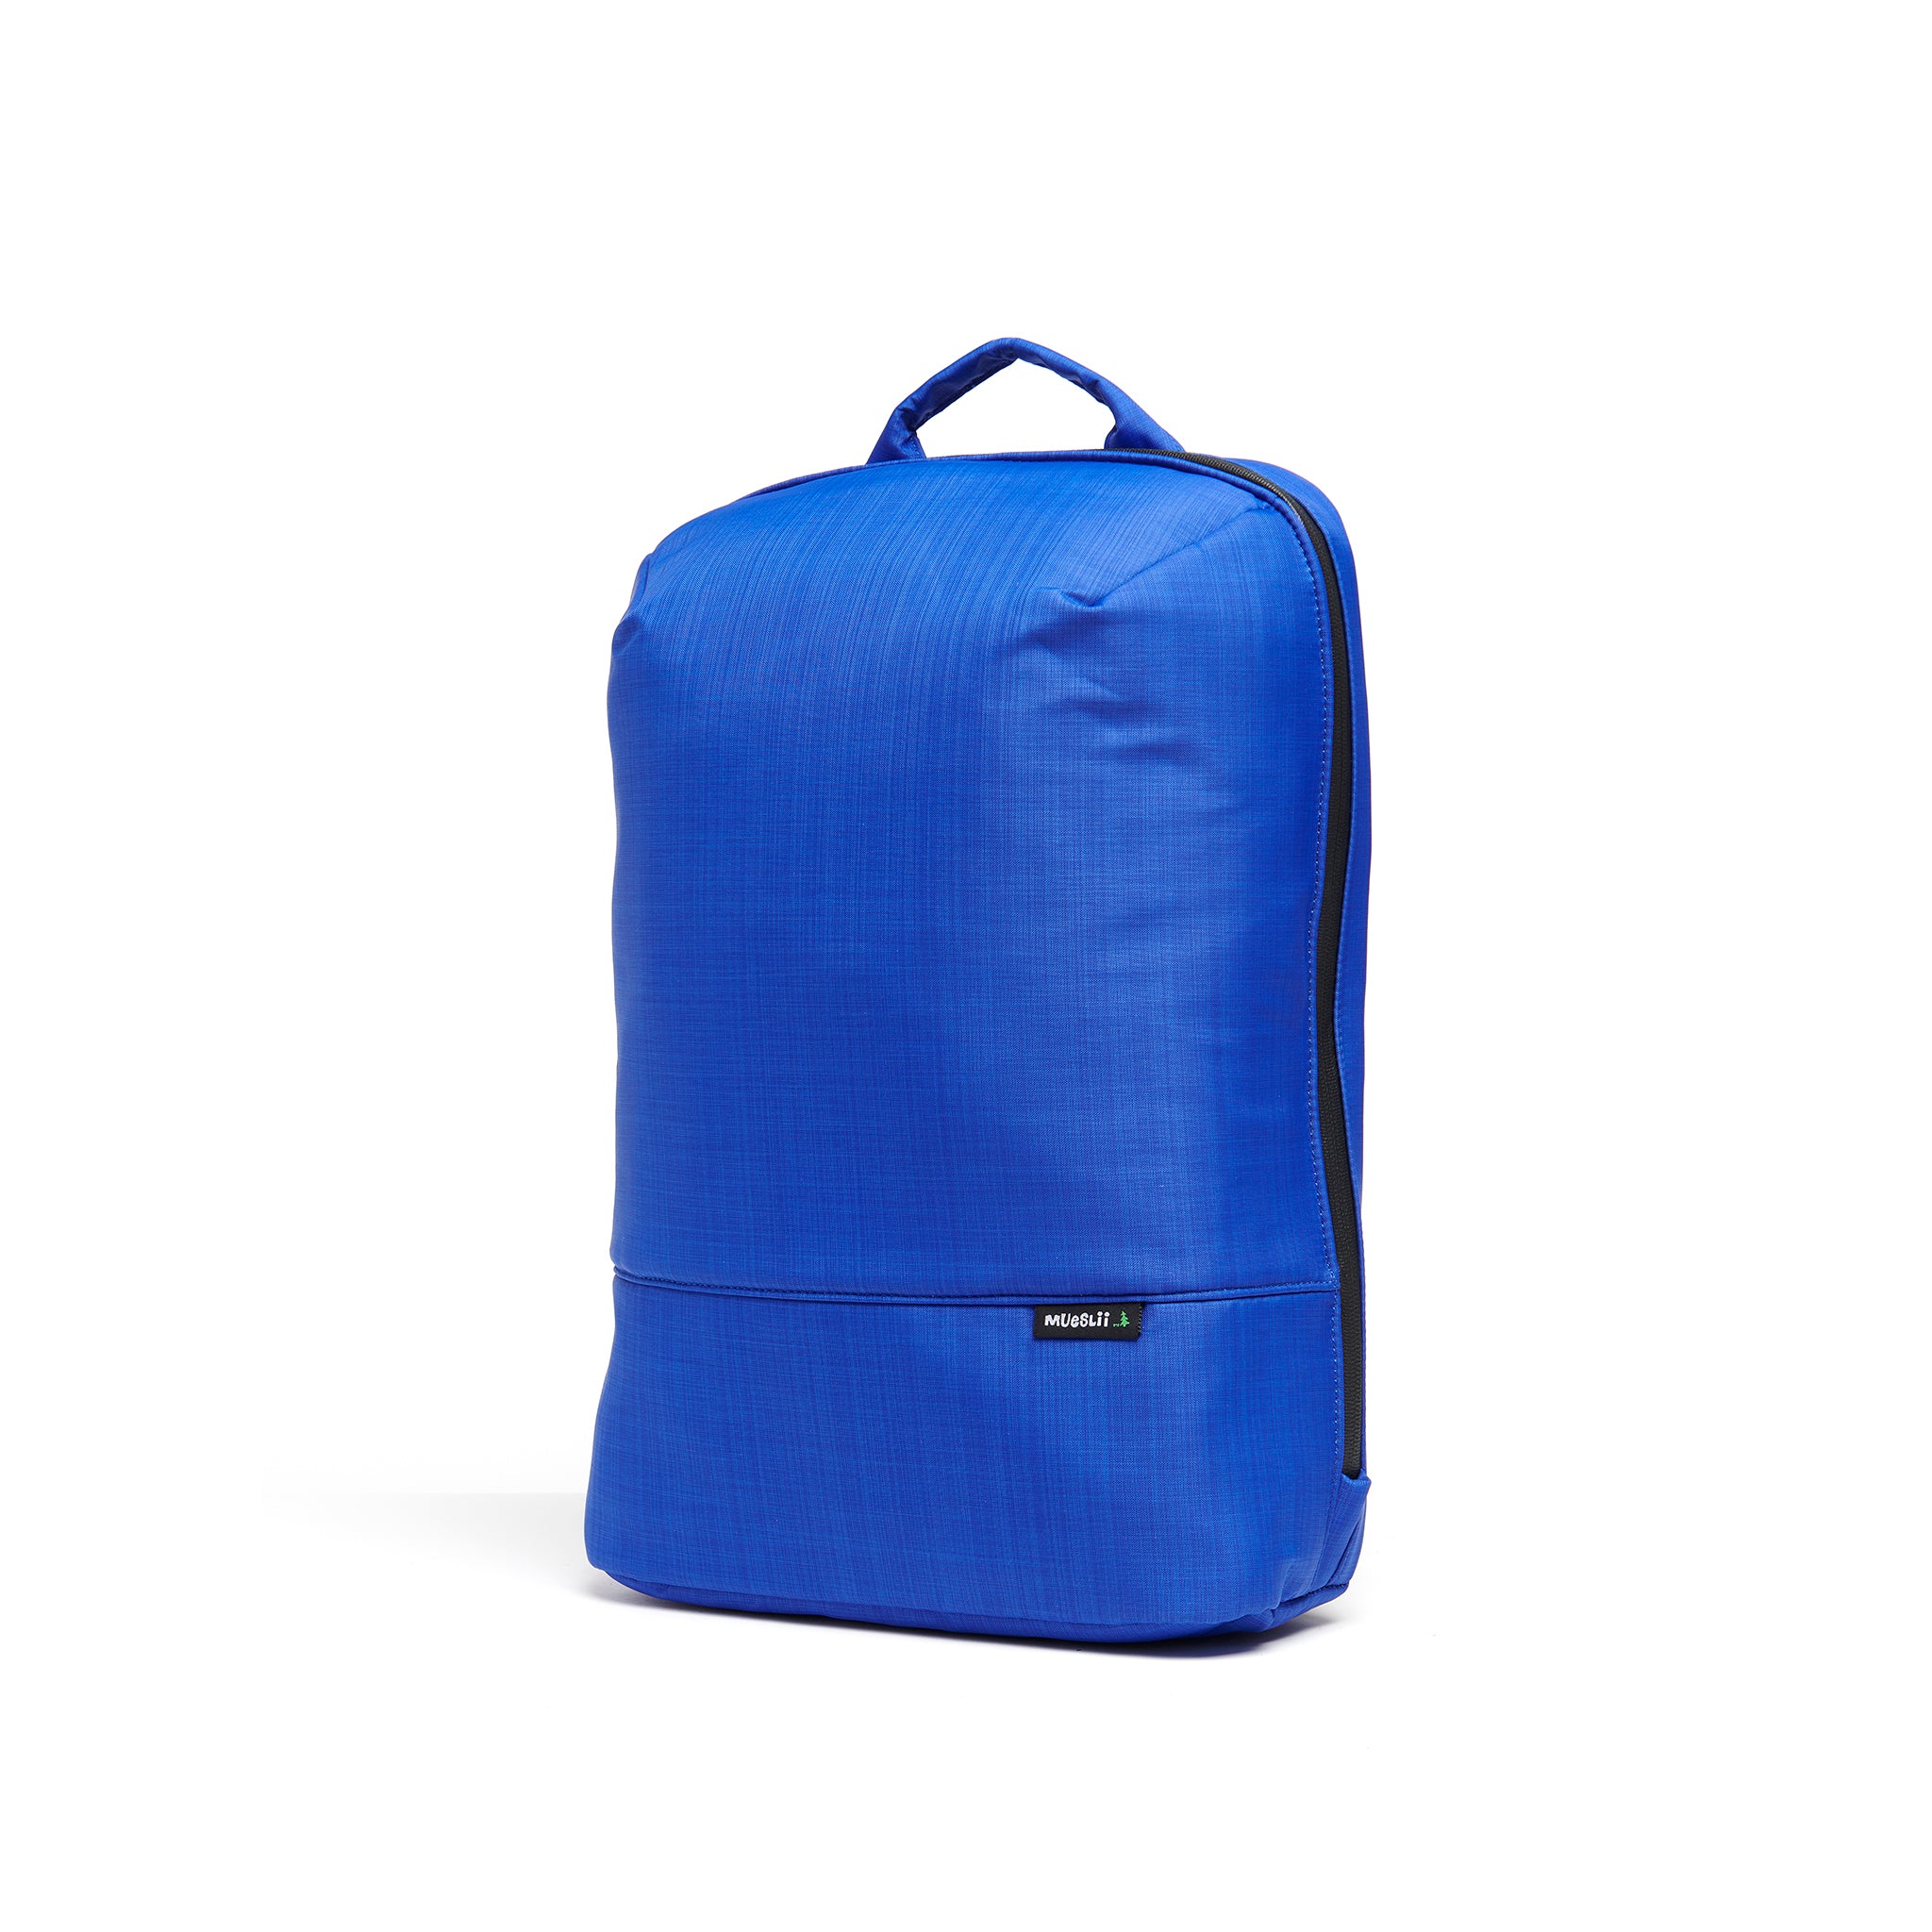 Mueslii daily backpack, made of  water resistant canvas nylon, with a laptop compartment, color summer blue, side view.